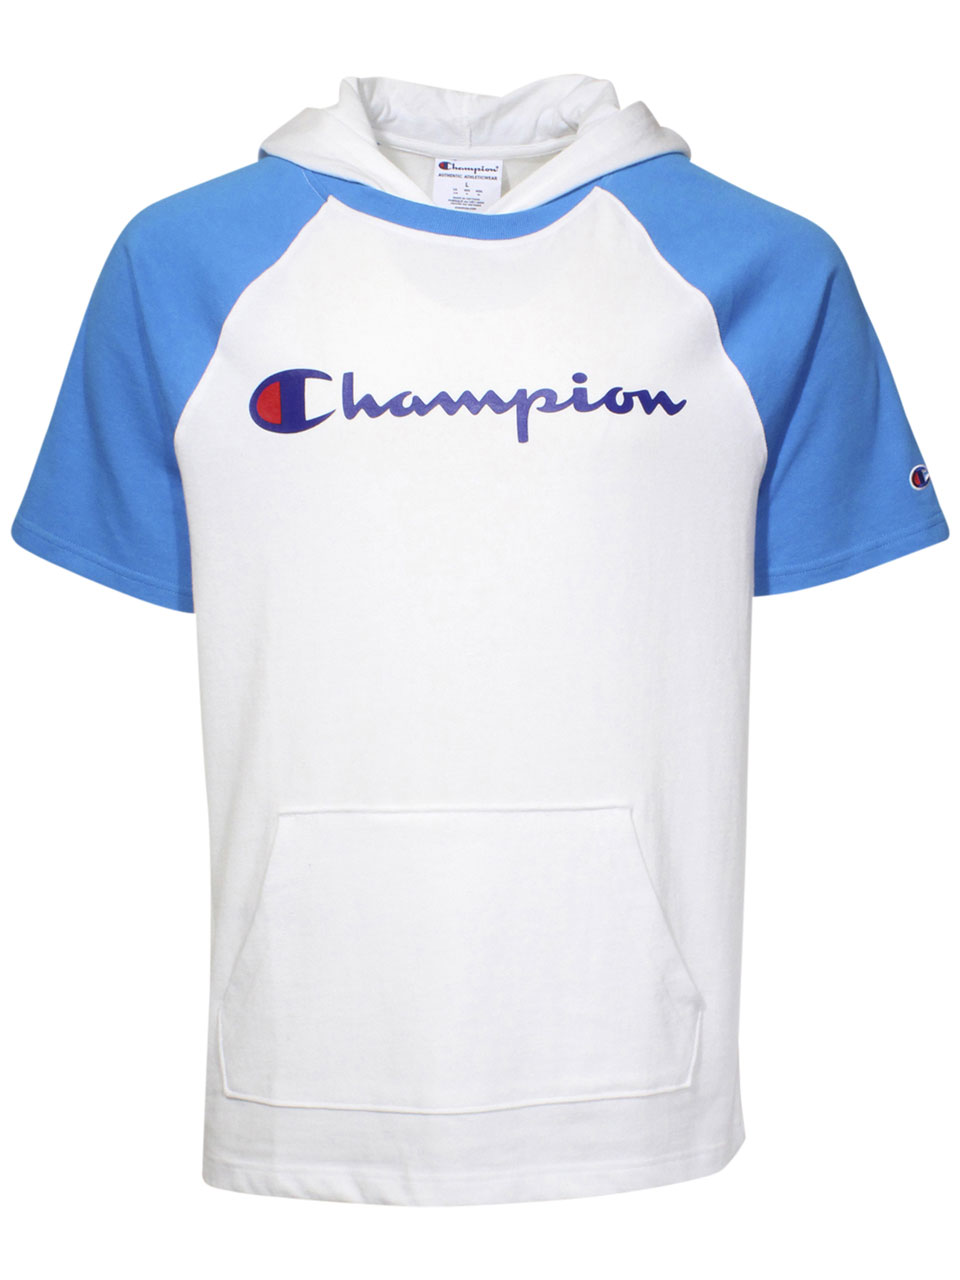 Champion Middleweight Hoodie Men's Short Hooded Cotton T-Shirt |